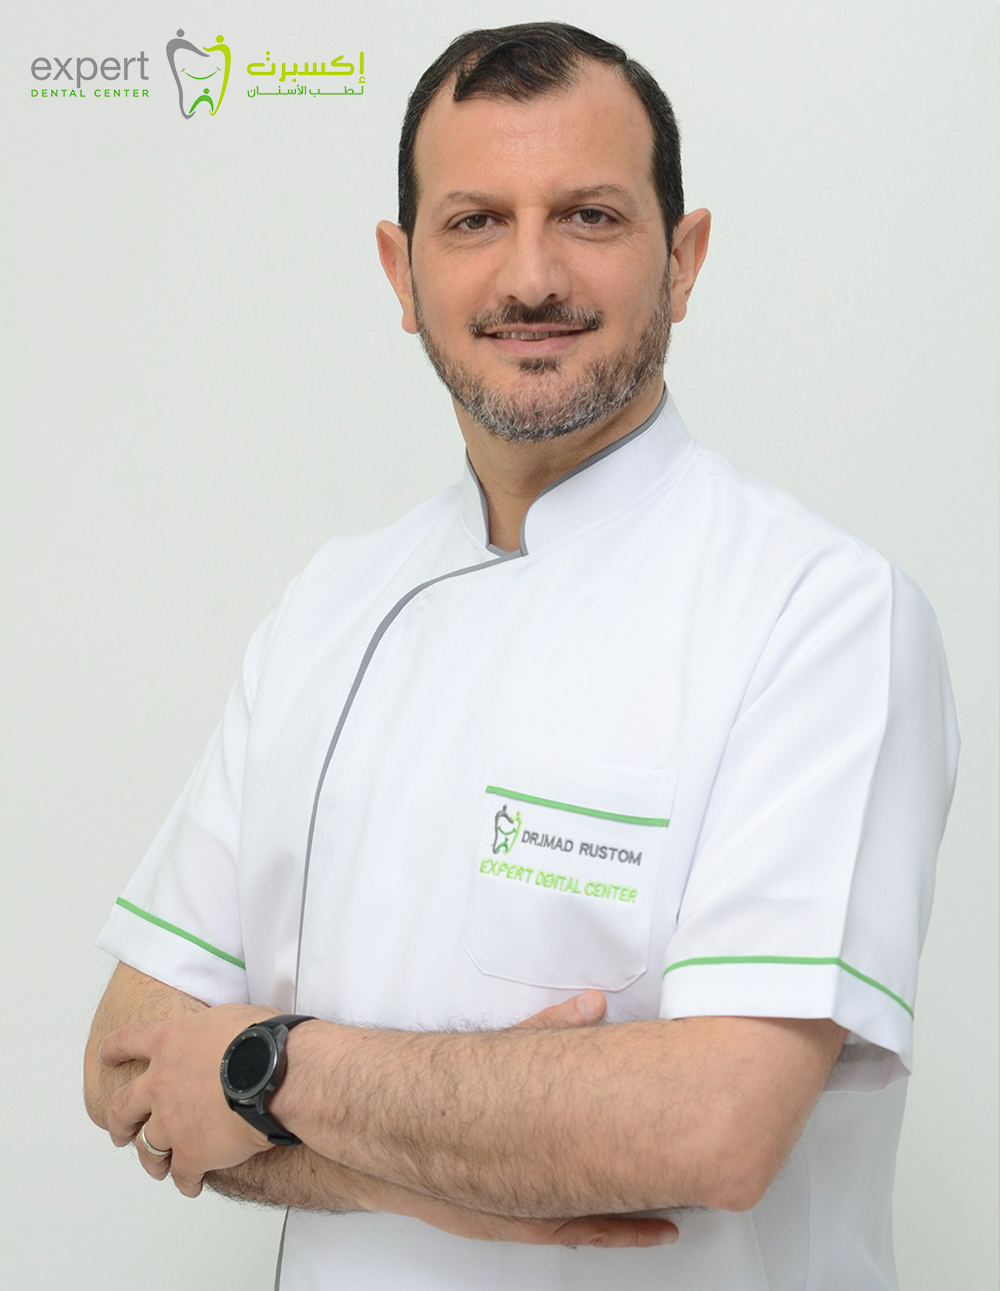 Dr. Imad Rustom is a prominent Senior Consultant Orthodontist in Qatar, Dentist 